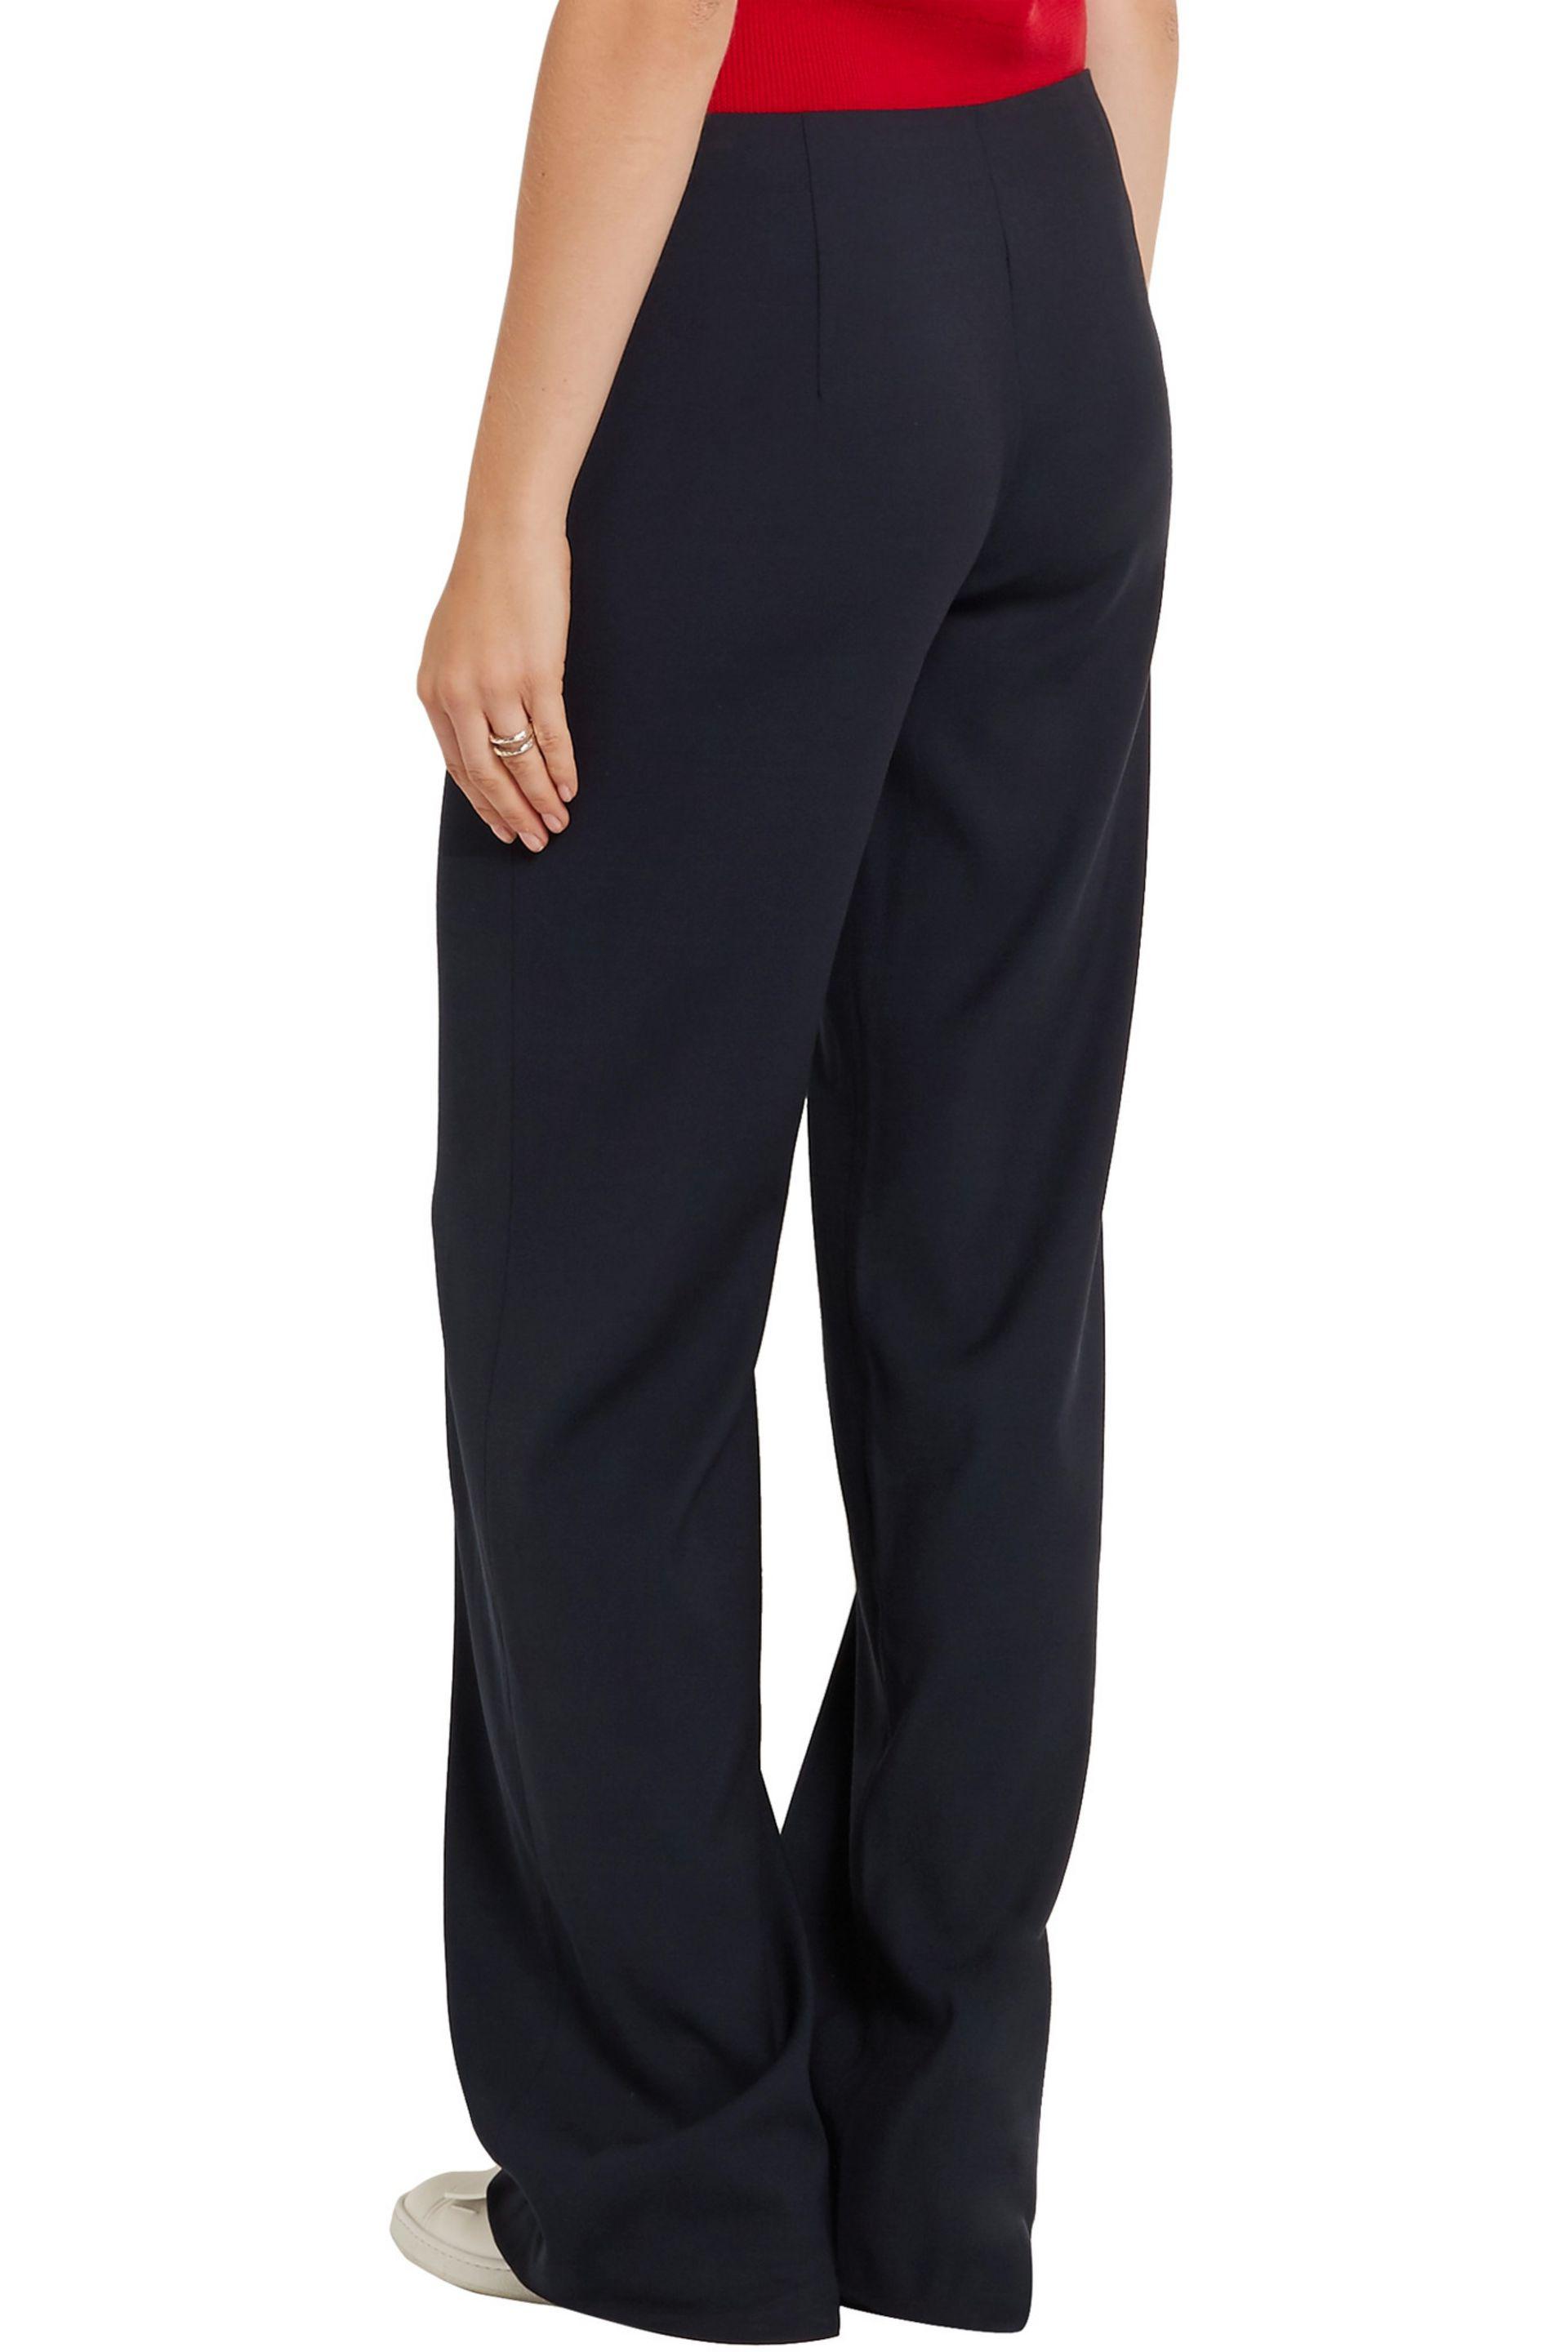 Vince Stretch-twill Wide-leg Pants in Navy (Blue) - Lyst